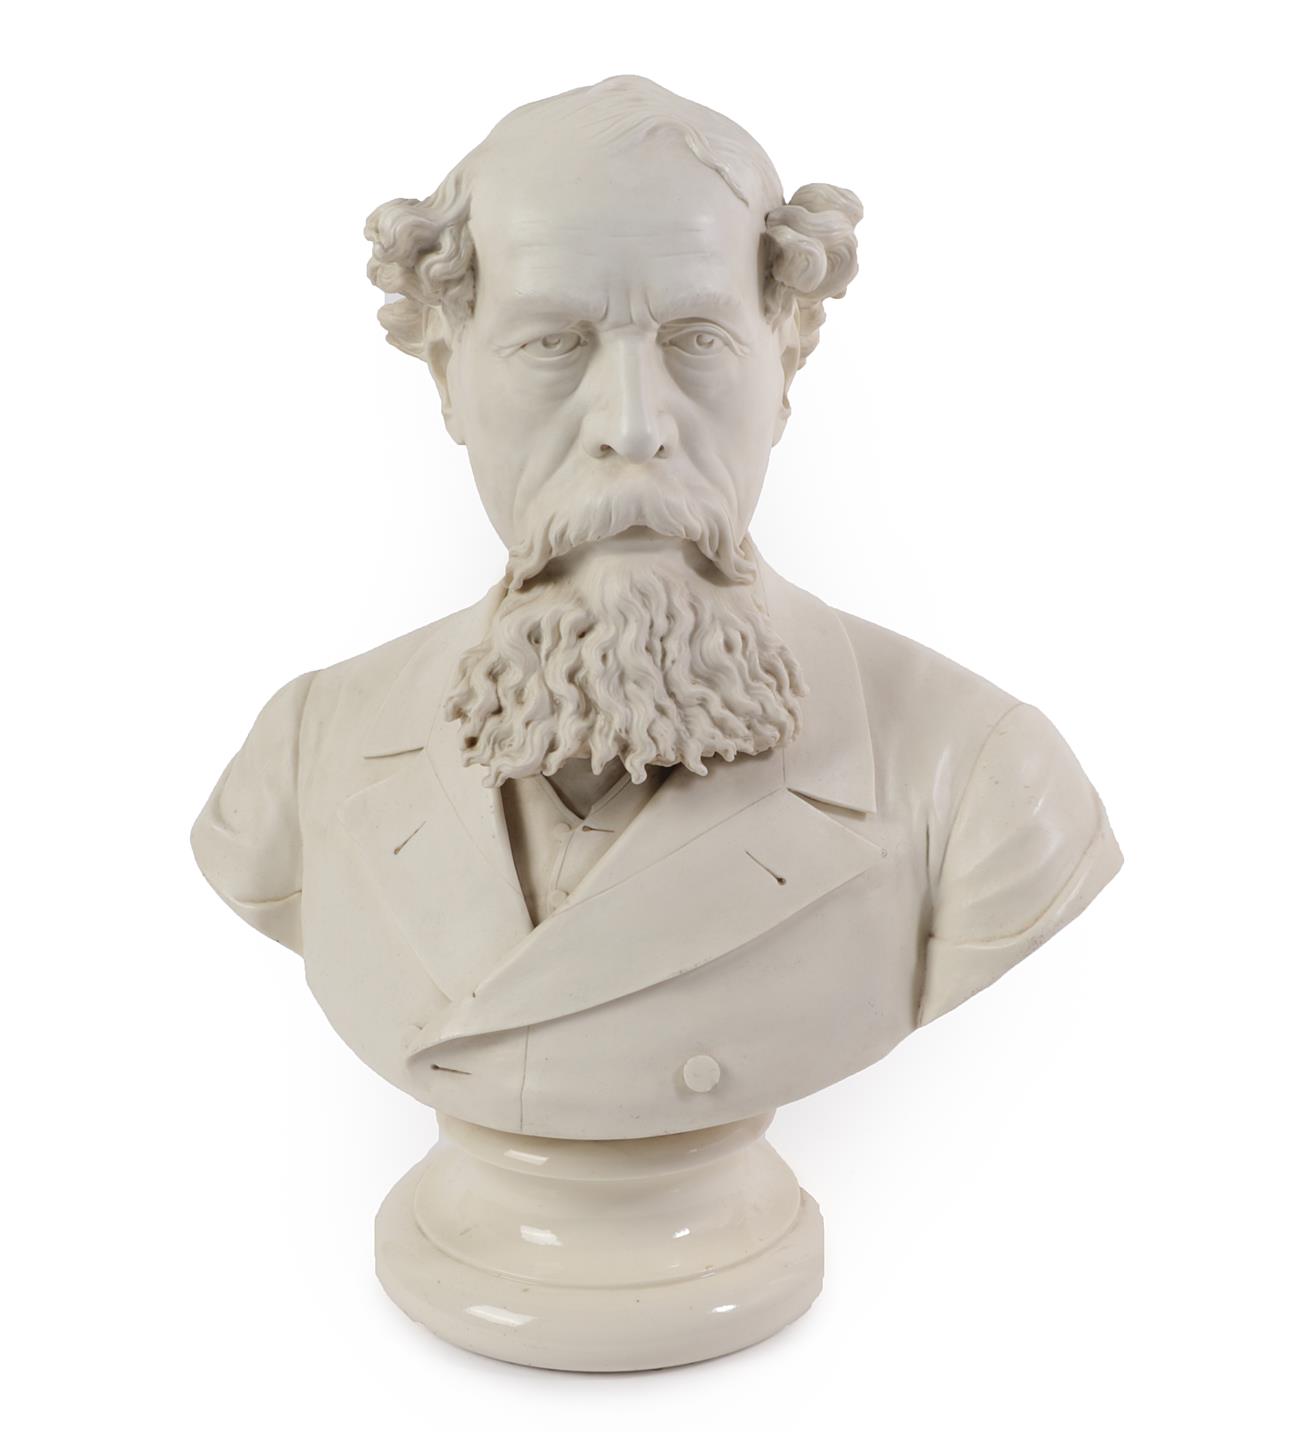 Lot 166 - A Belleek (First Period) Parian Bust of Charles Dickens, inscribed W.W. Gallimore Sc for...